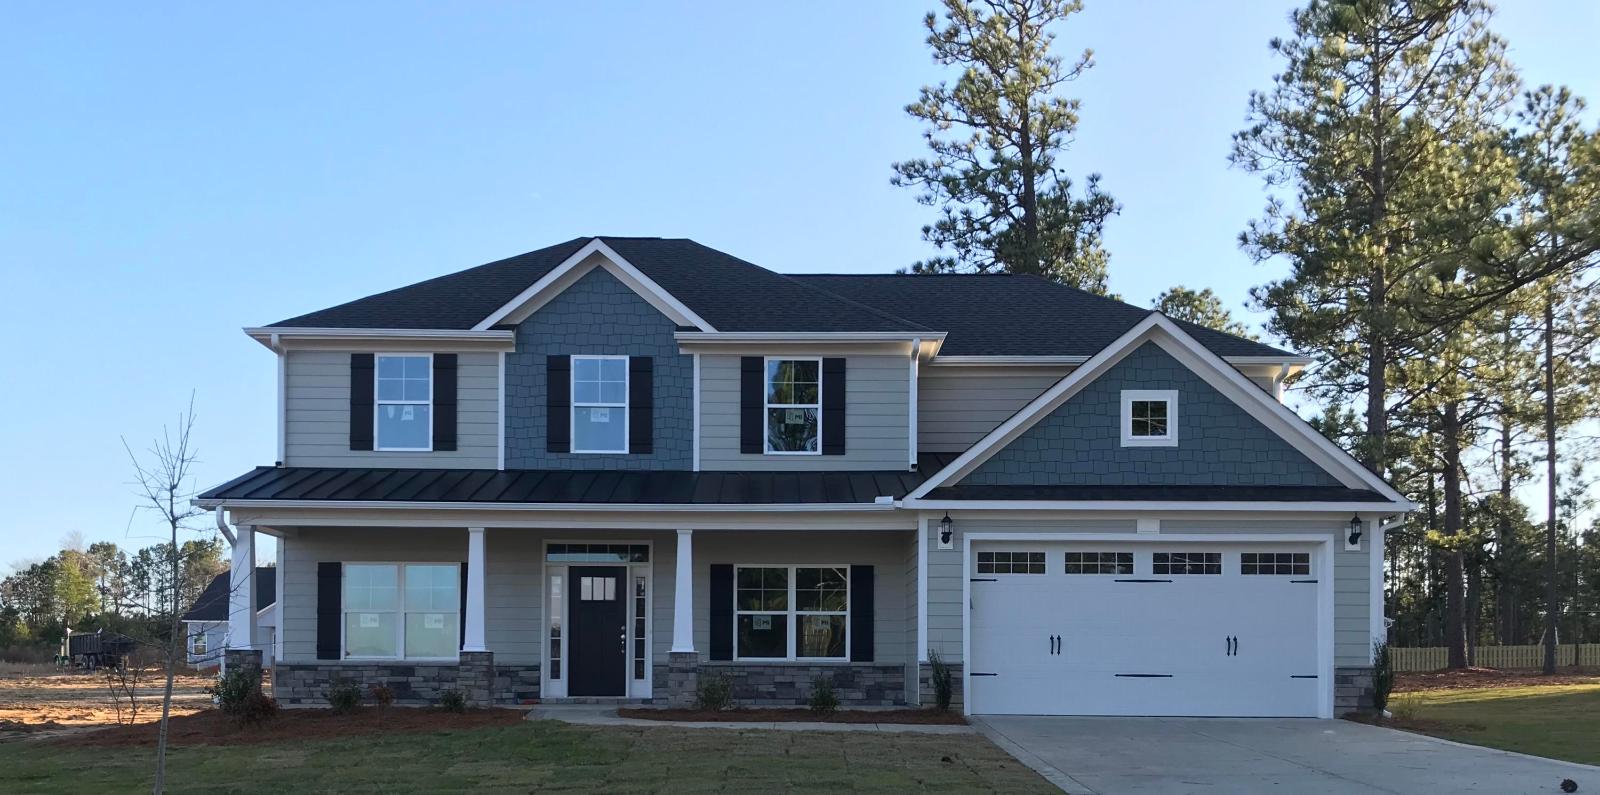 619 Planters Row Whispering Pines Nc Better Homes And Gardens